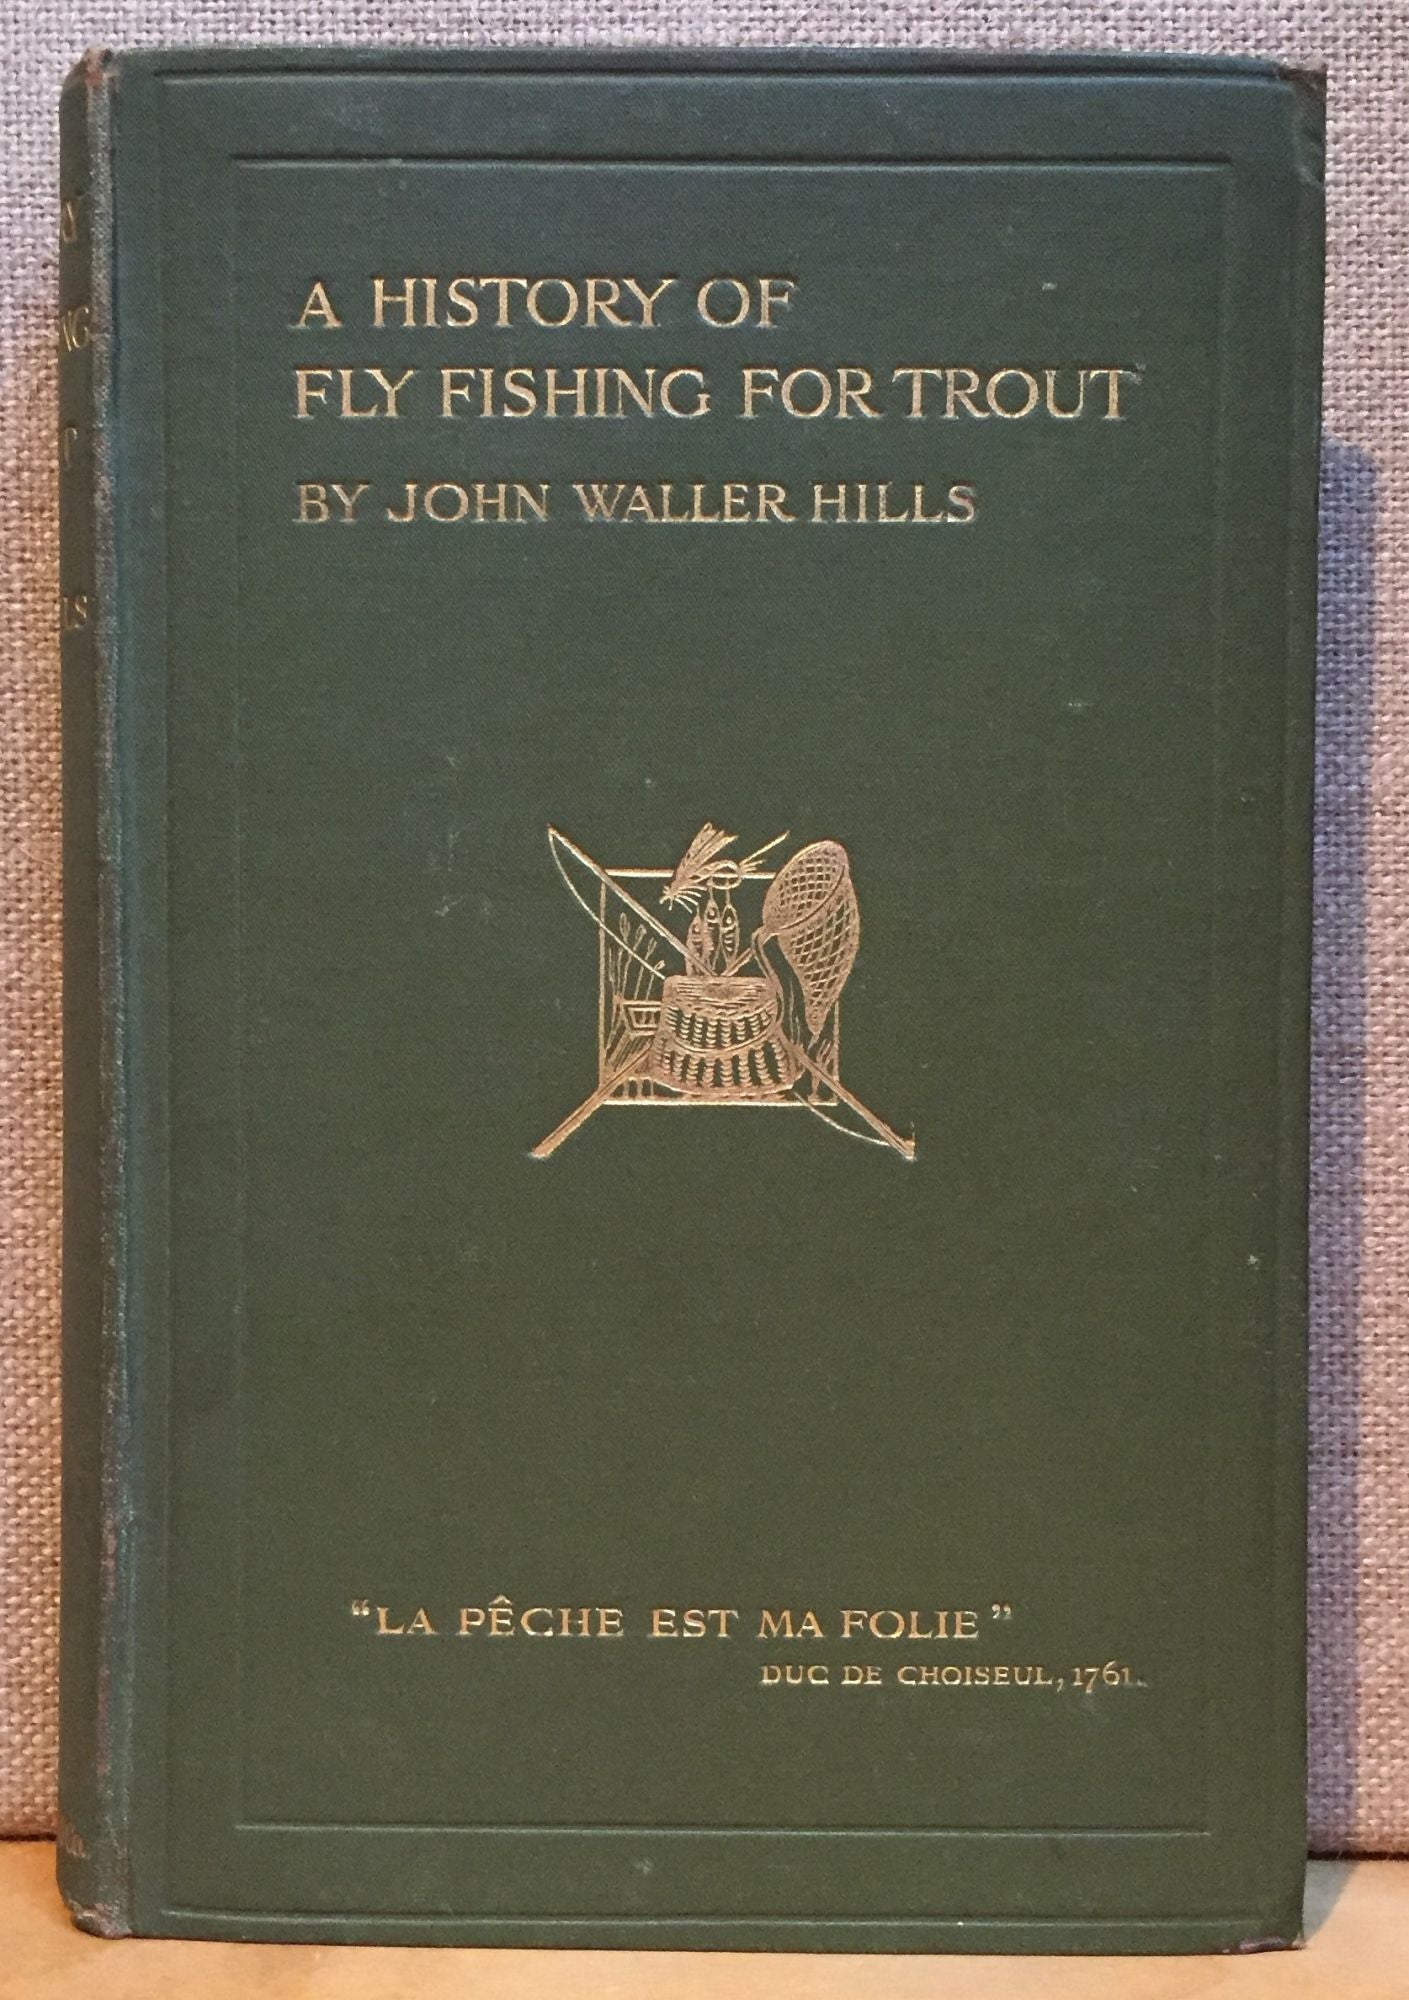 A History of Fly Fishing for Trout, John Waller Hills